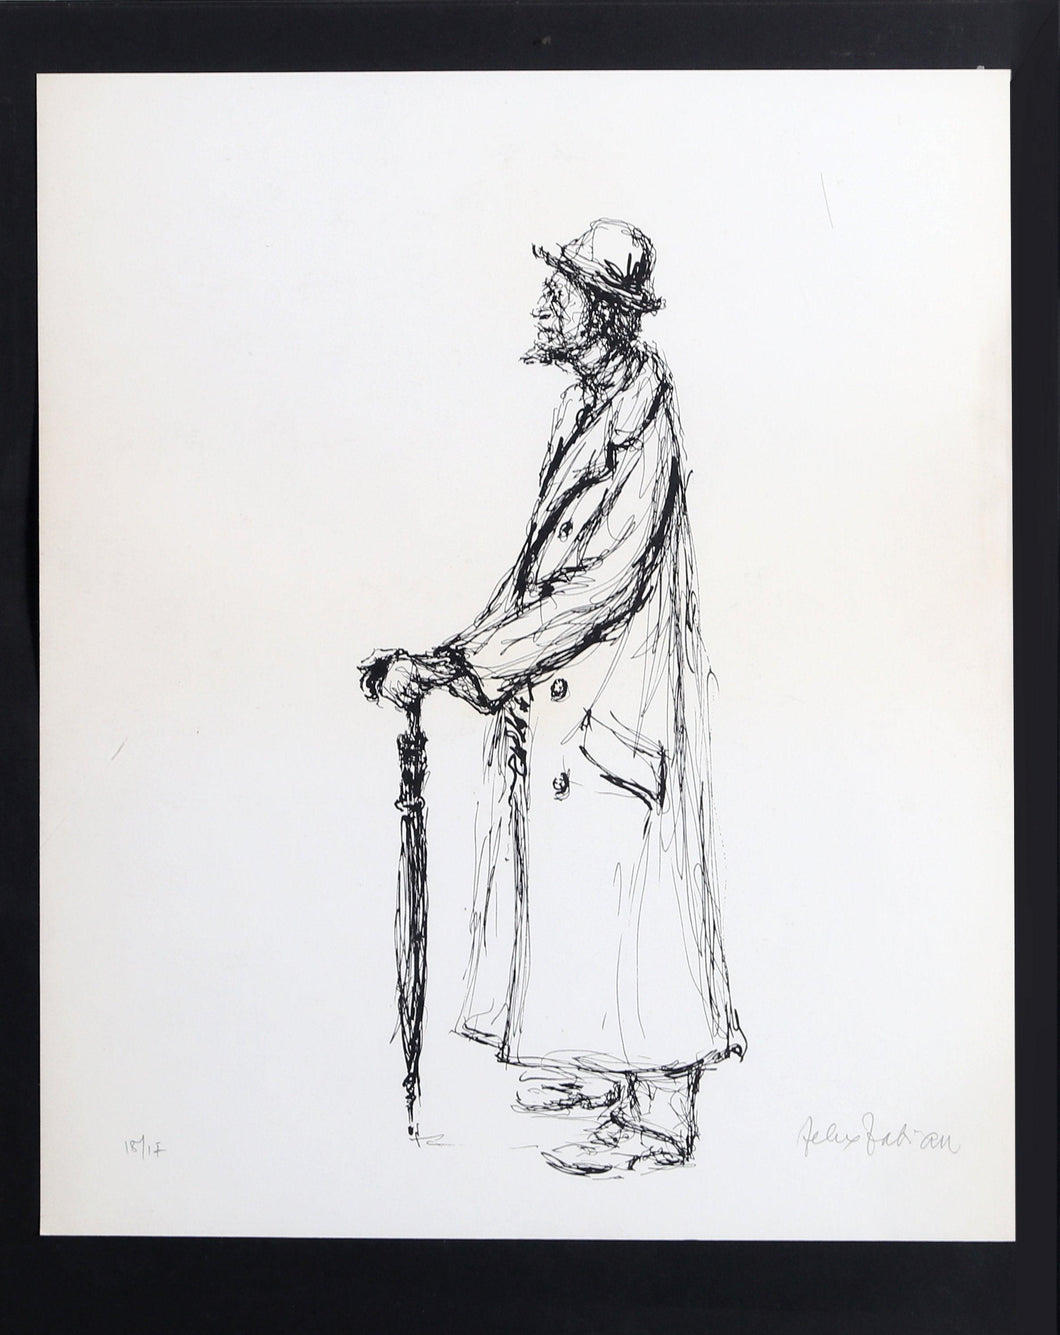 Untitled - Man with Umbrella Lithograph | Felix Fabian,{{product.type}}